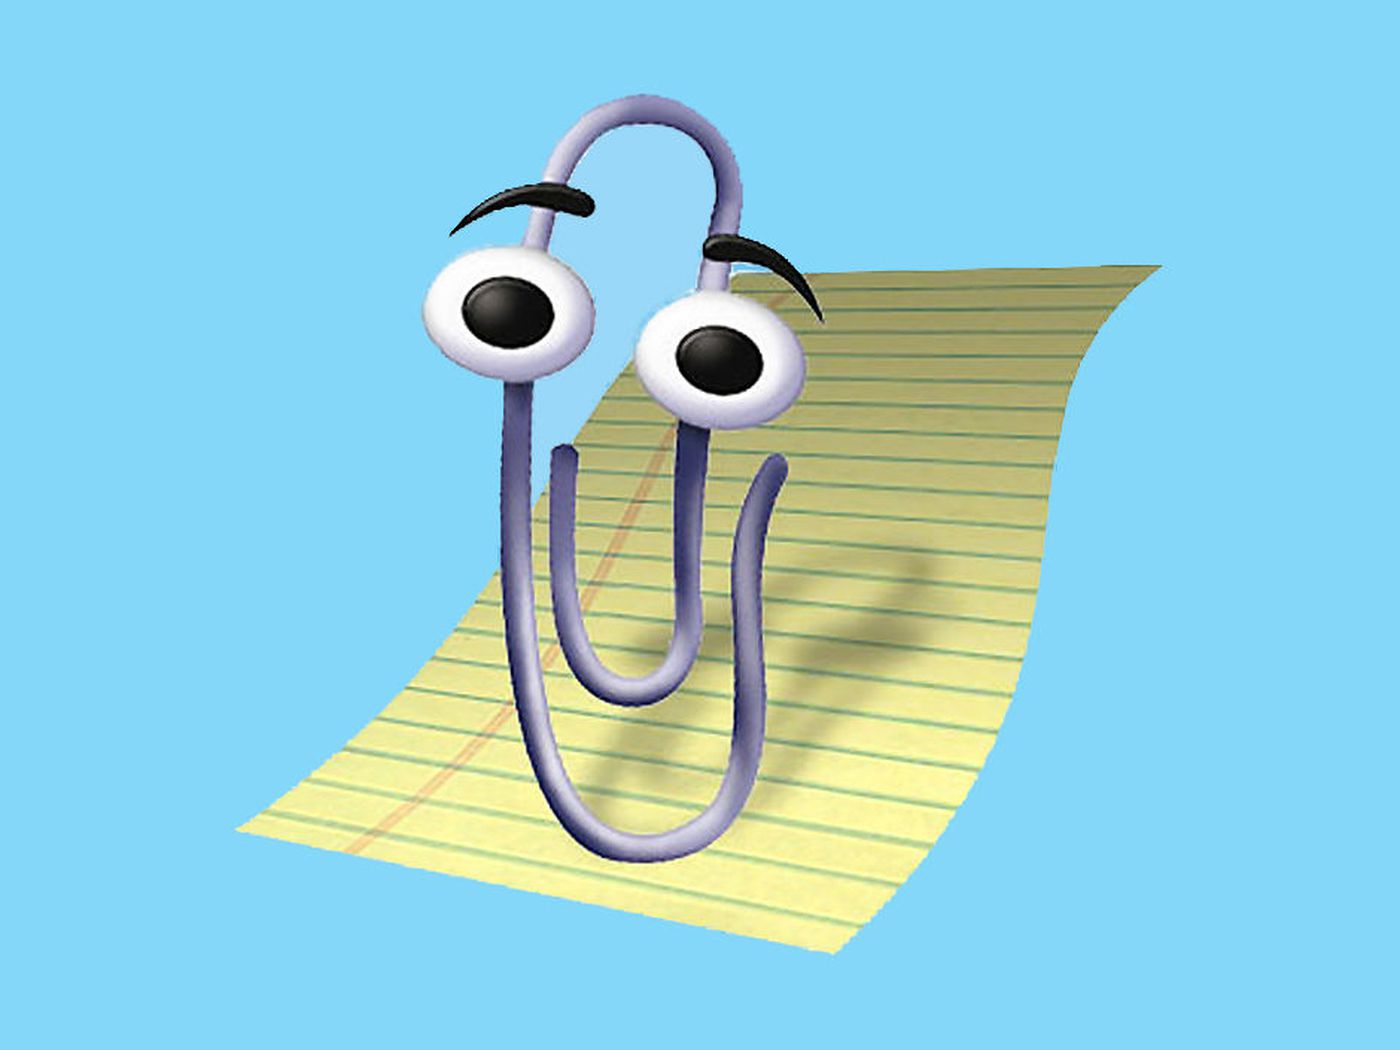 From Papyrus to Toilet Paper 🧻: This Is Likely the Hardest Quiz That’s All About Paper – Can You Pass It? Microsoft Clippy